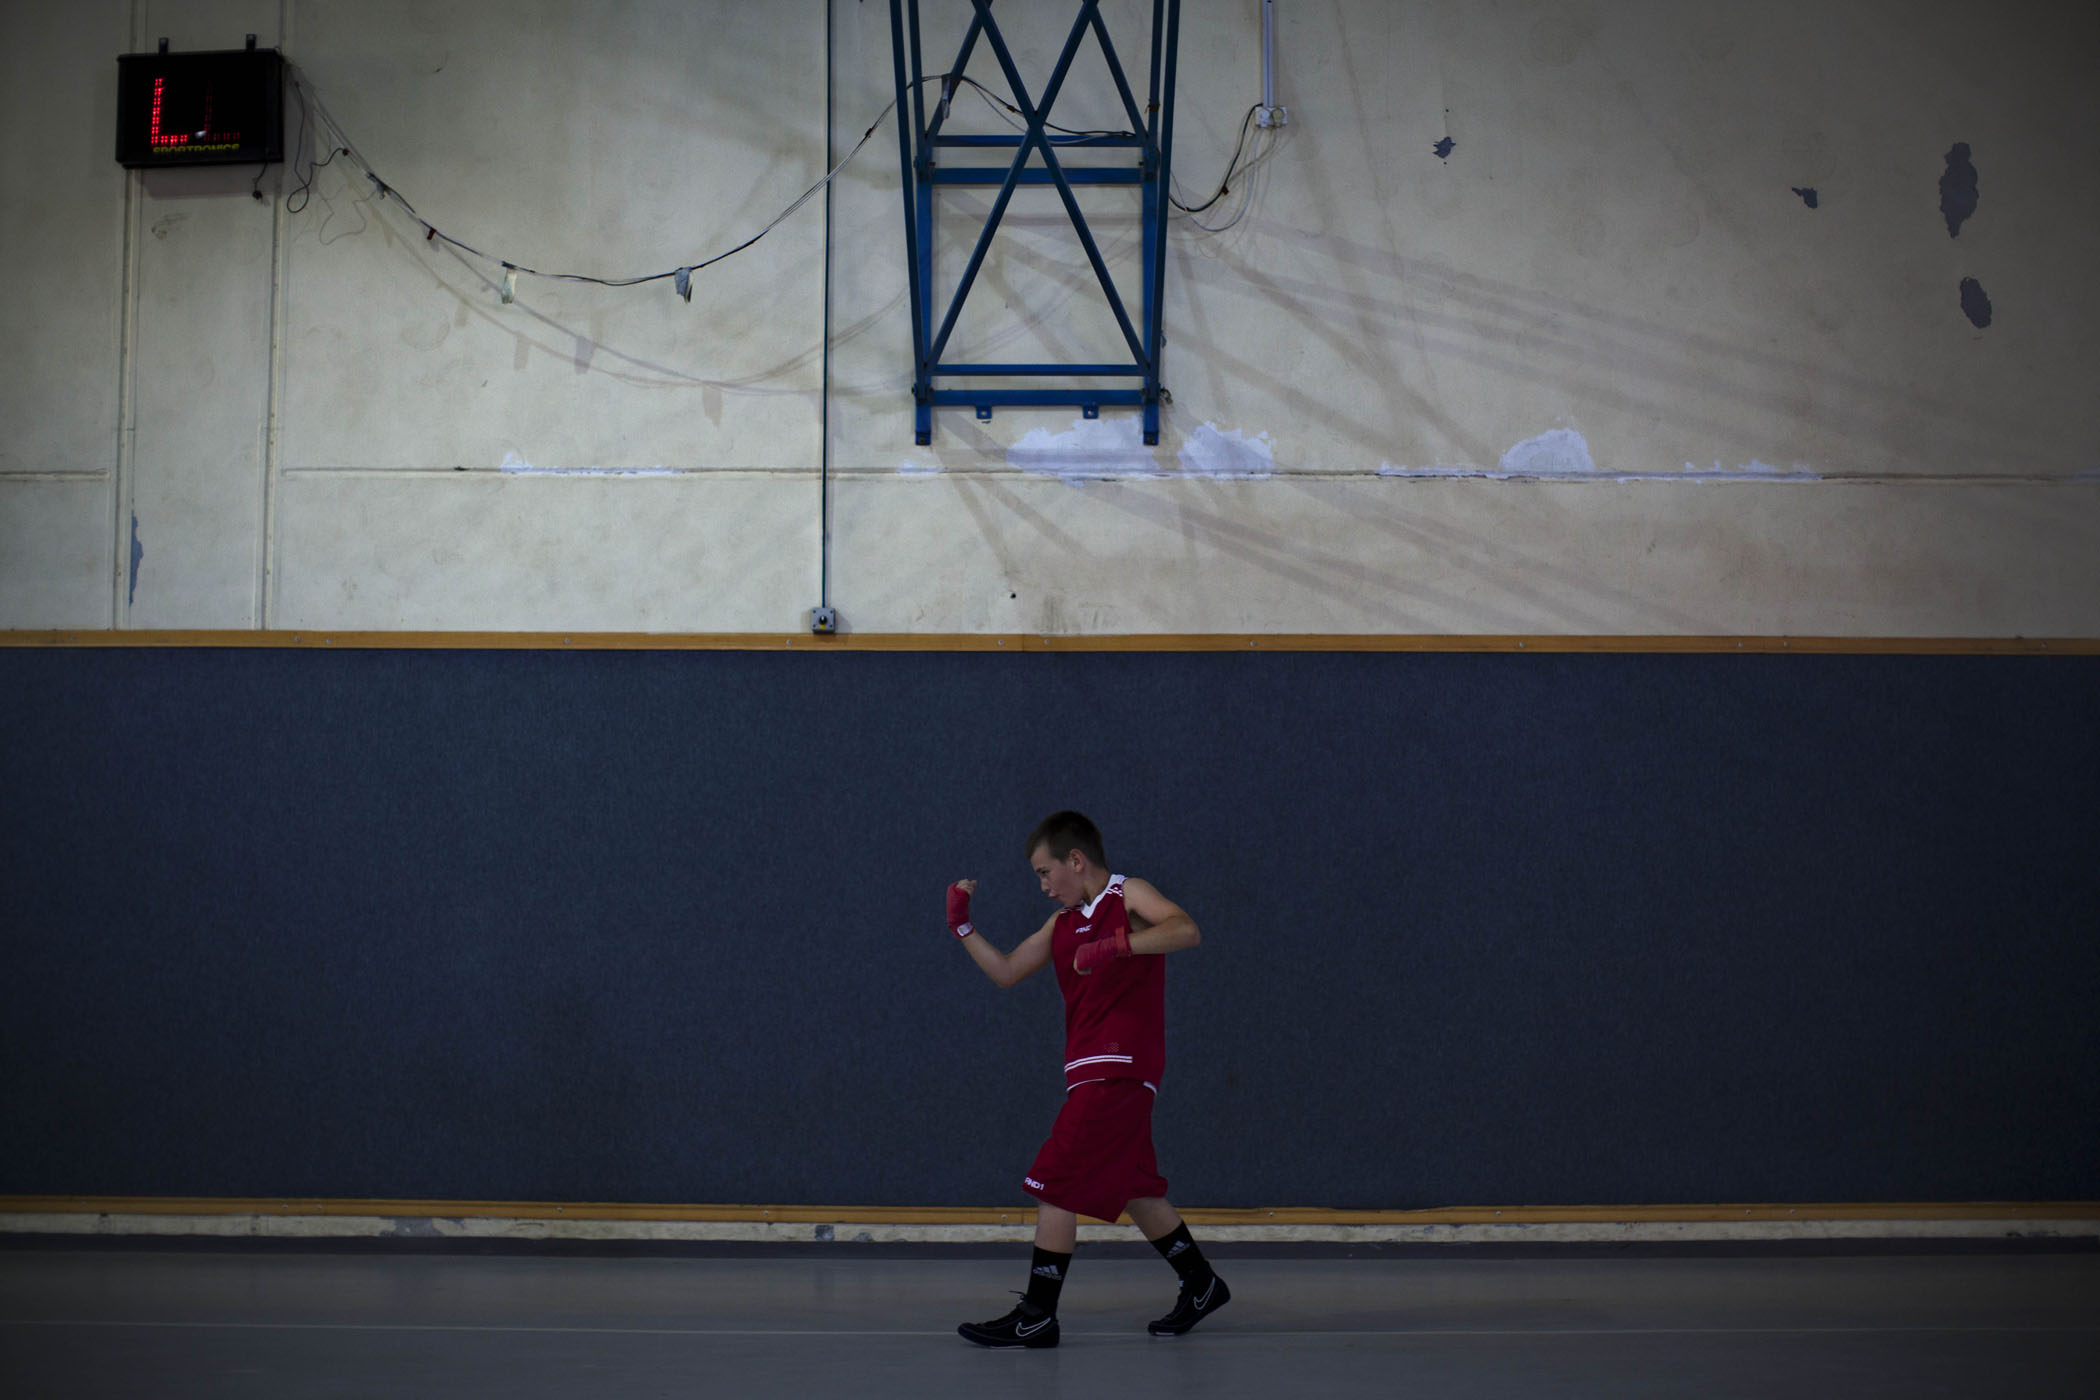 An Israeli boy warms up before a fight during Israel's National Youth Boxing Championship in the Arab village of Arabe, northern Israel.